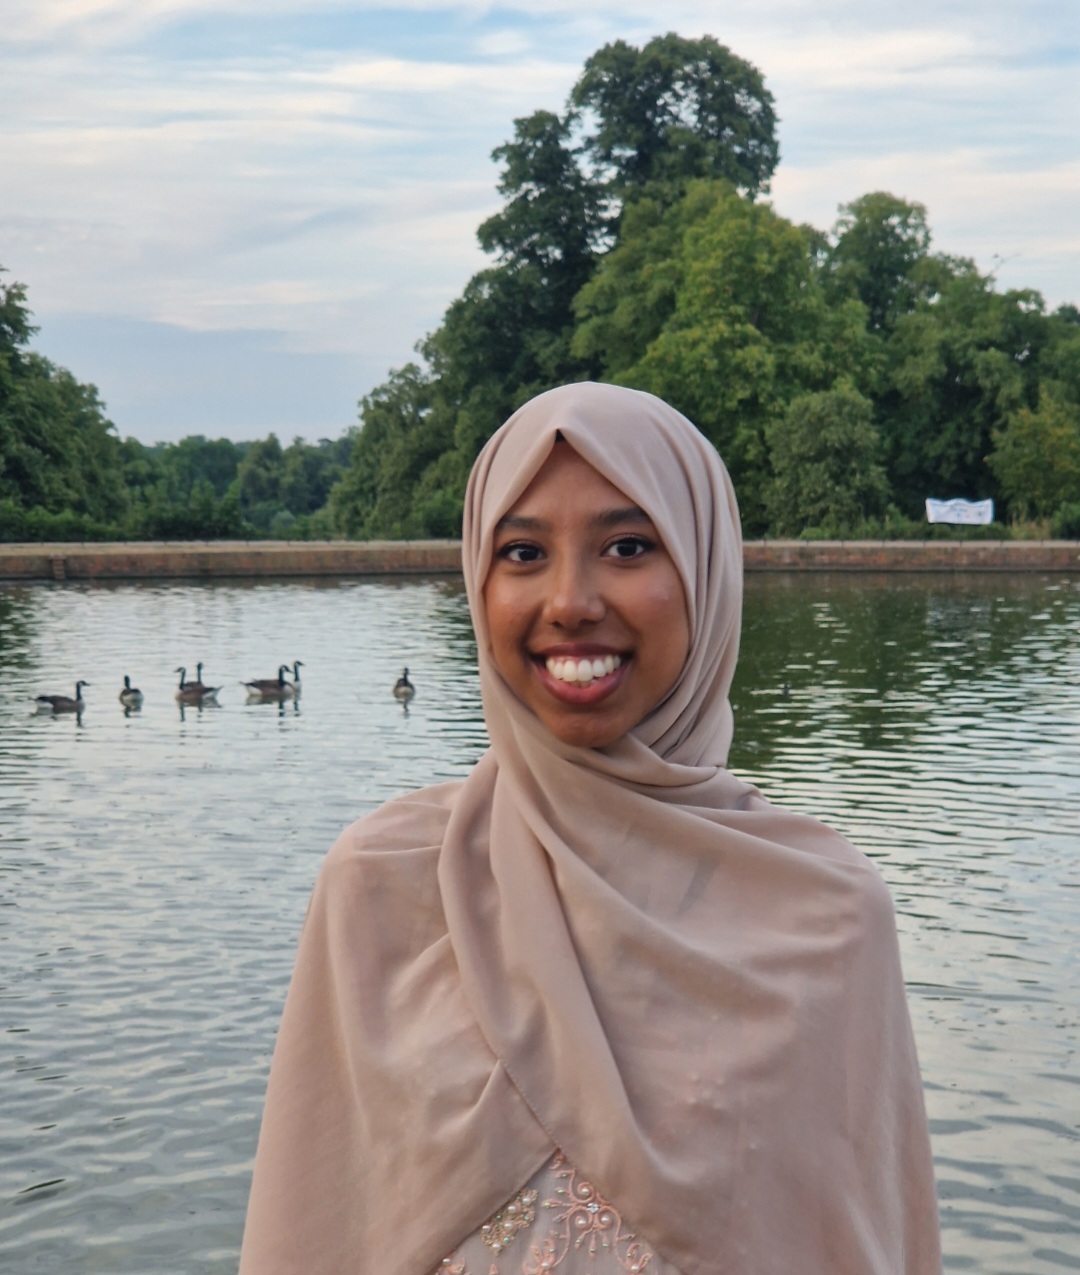 the photo shows our staff member Anjuma standing in front of an outdoor lake with ducks, she is smiling straight at the camera